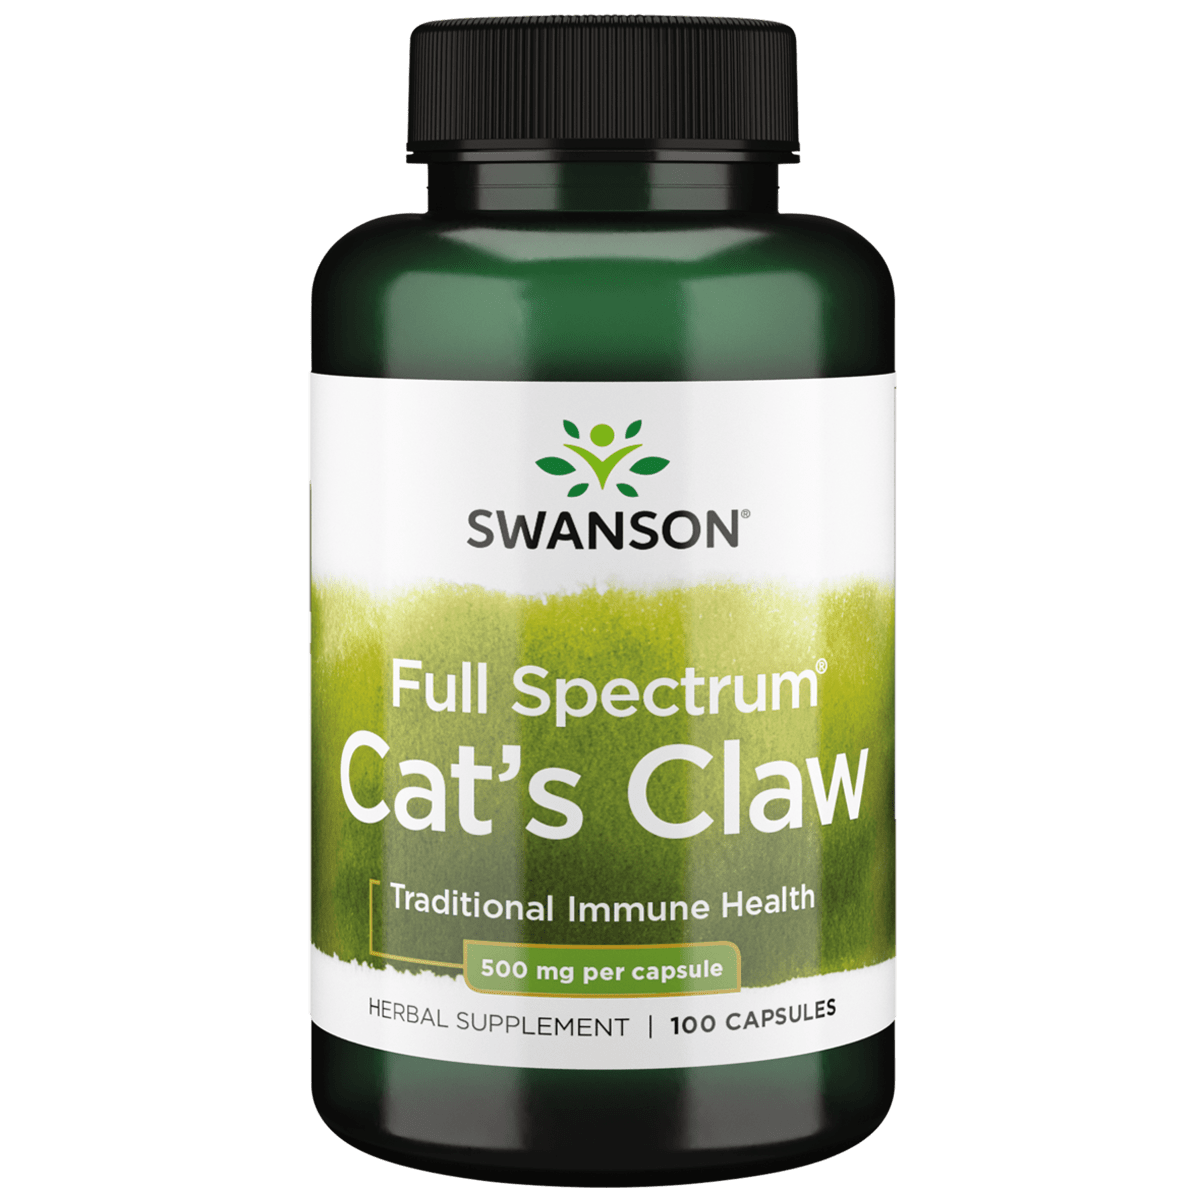 Swanson Cat's Claw (Full Spectrum) 500mg | healthy.co.nz